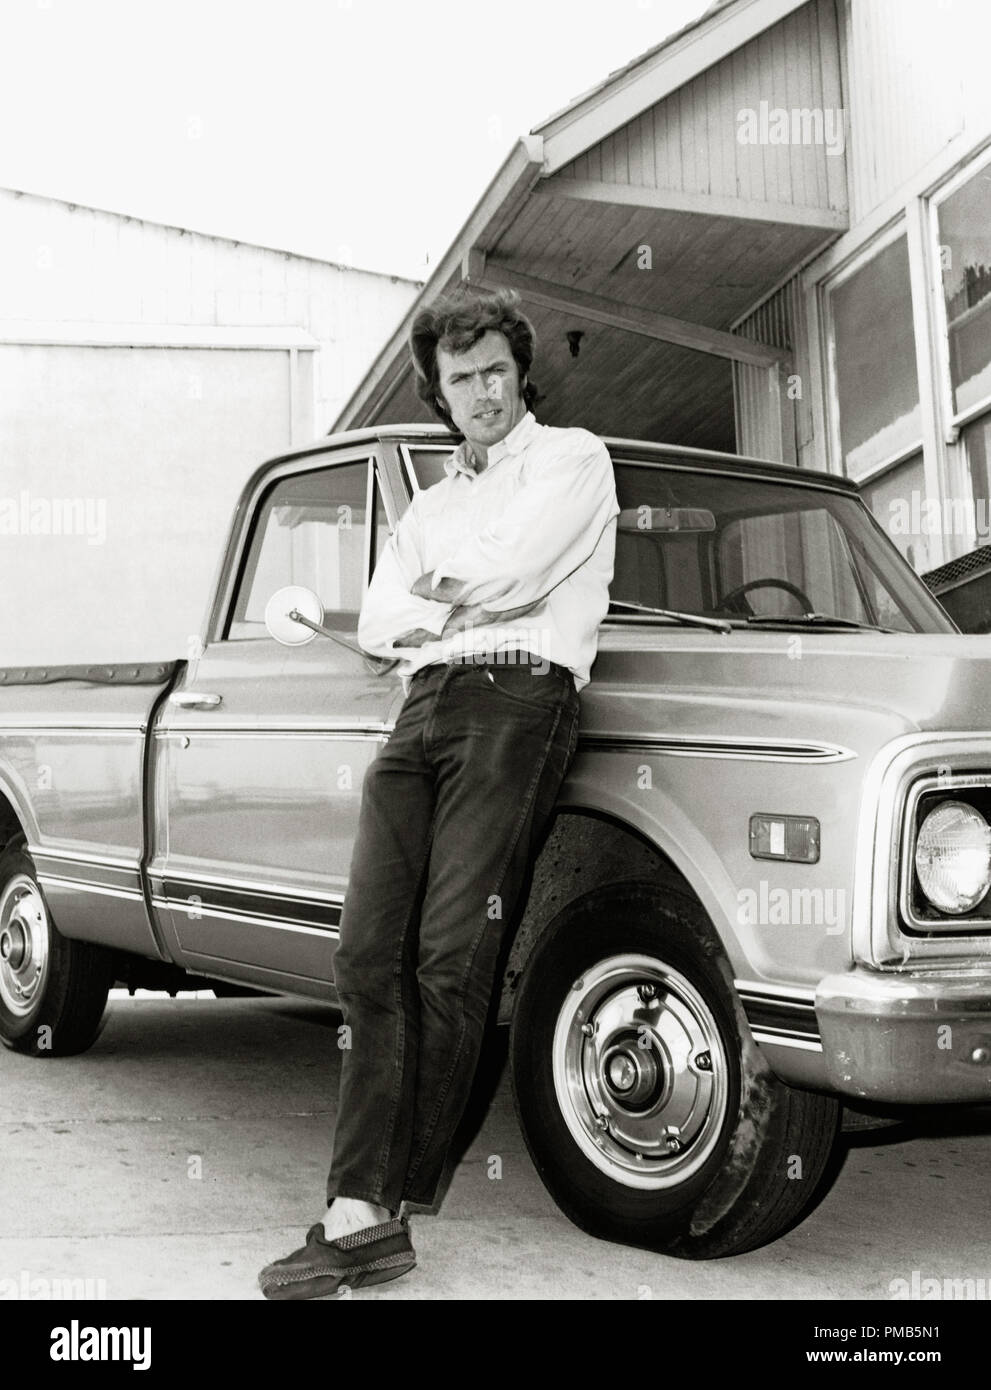 Clint Eastwood, 'The Beguiled' 1971 Universal Pictures   File Reference # 33536 606THA Stock Photo